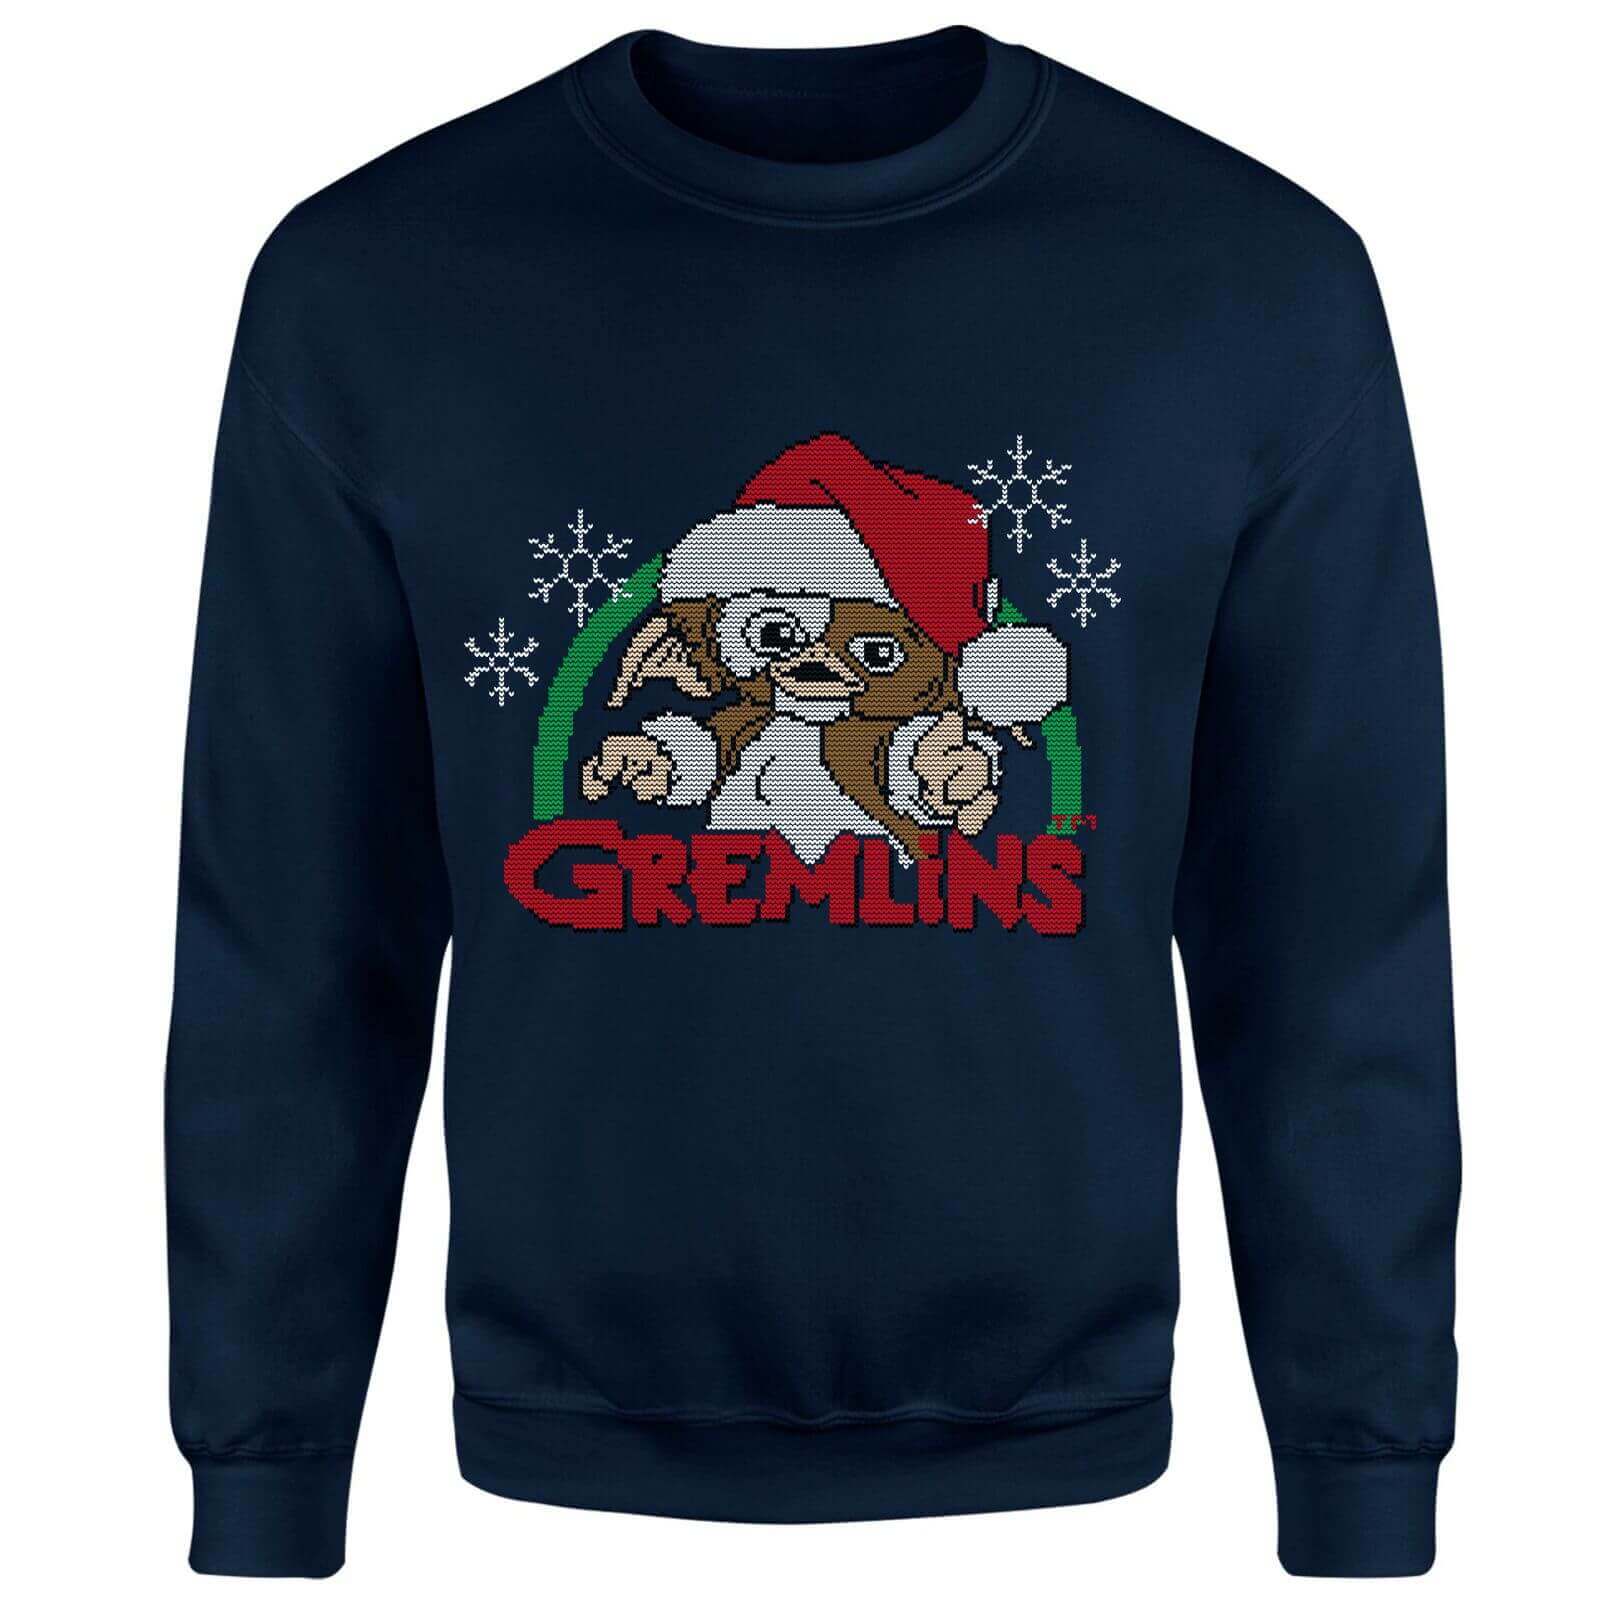 Gremlins Another Reason To Hate Christmas Jumper - Navy - XXL - Navy blauw product